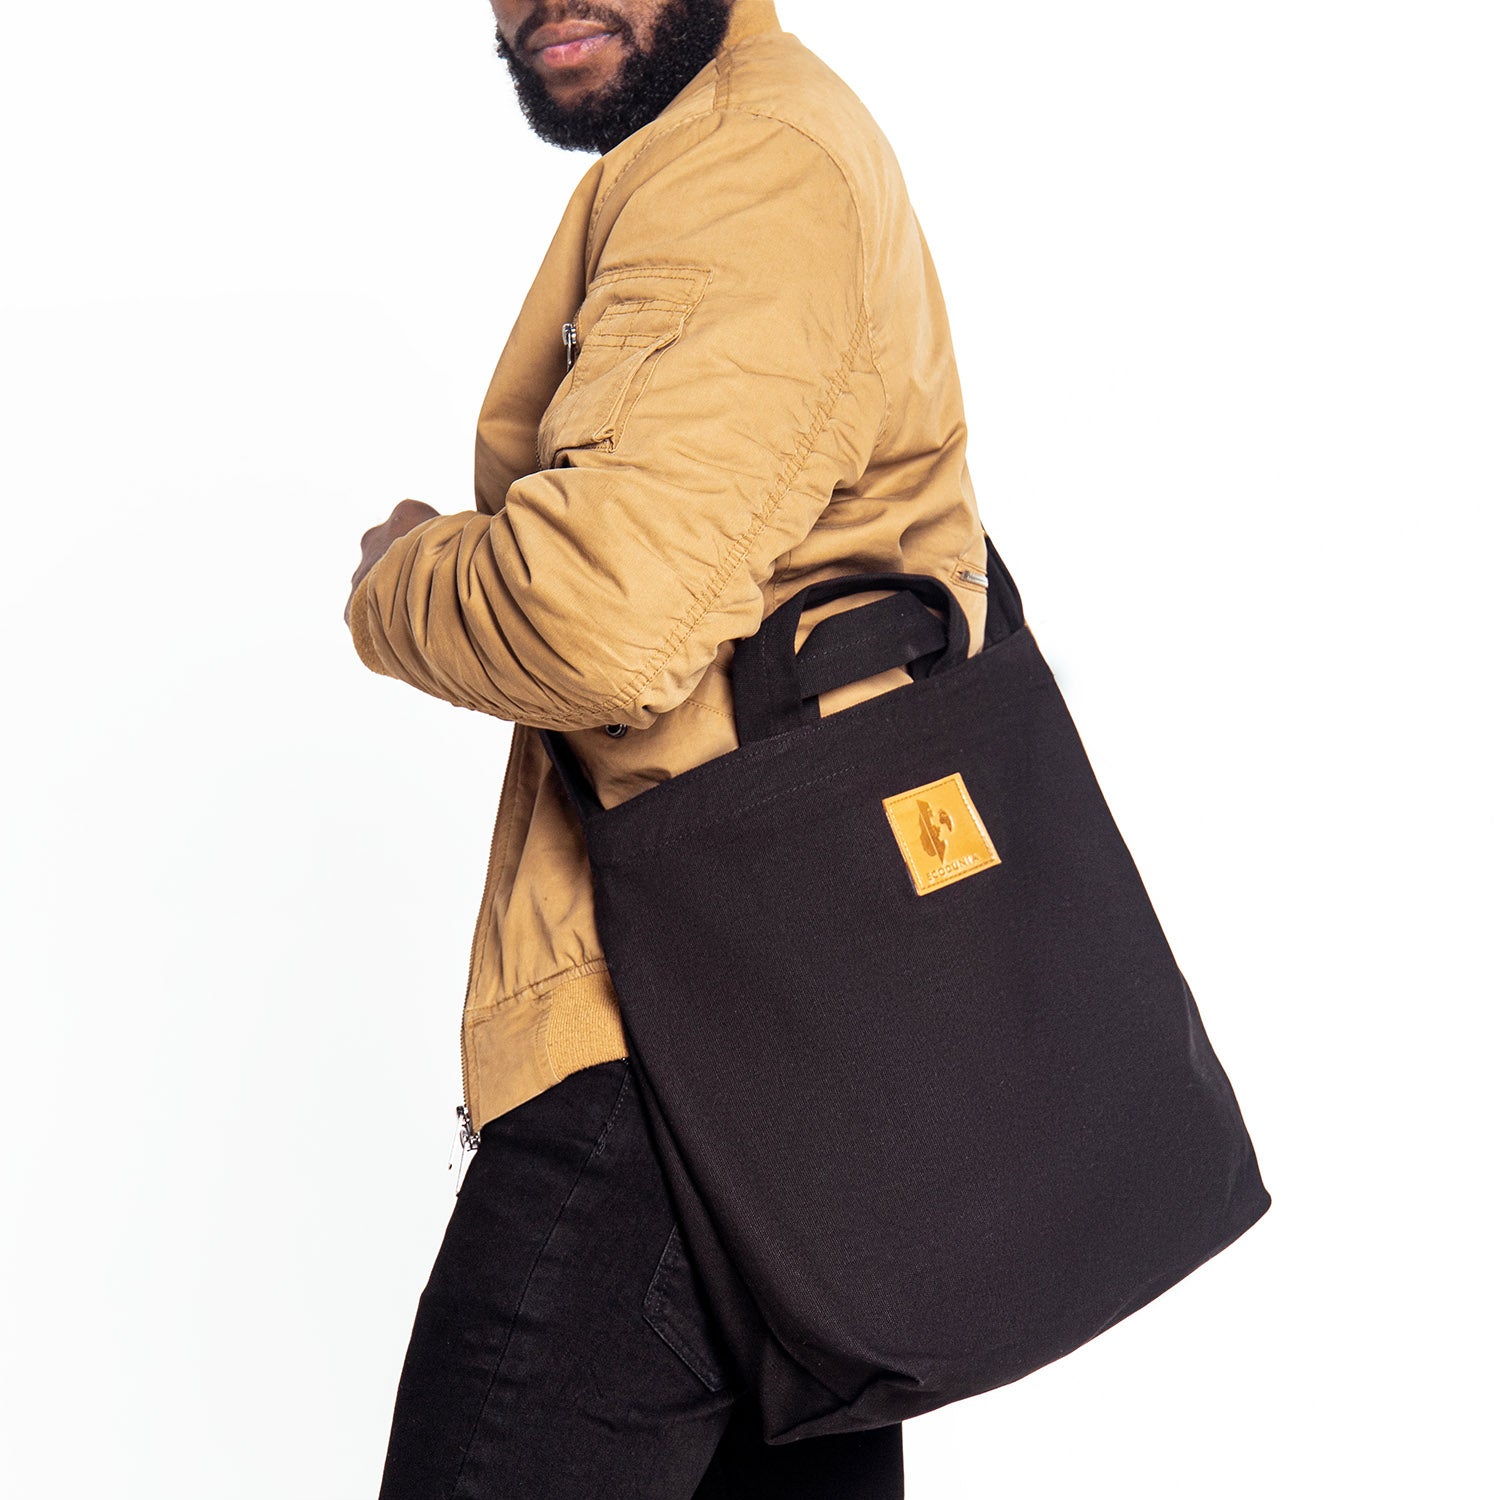 The Amani Carry All Bag - Black